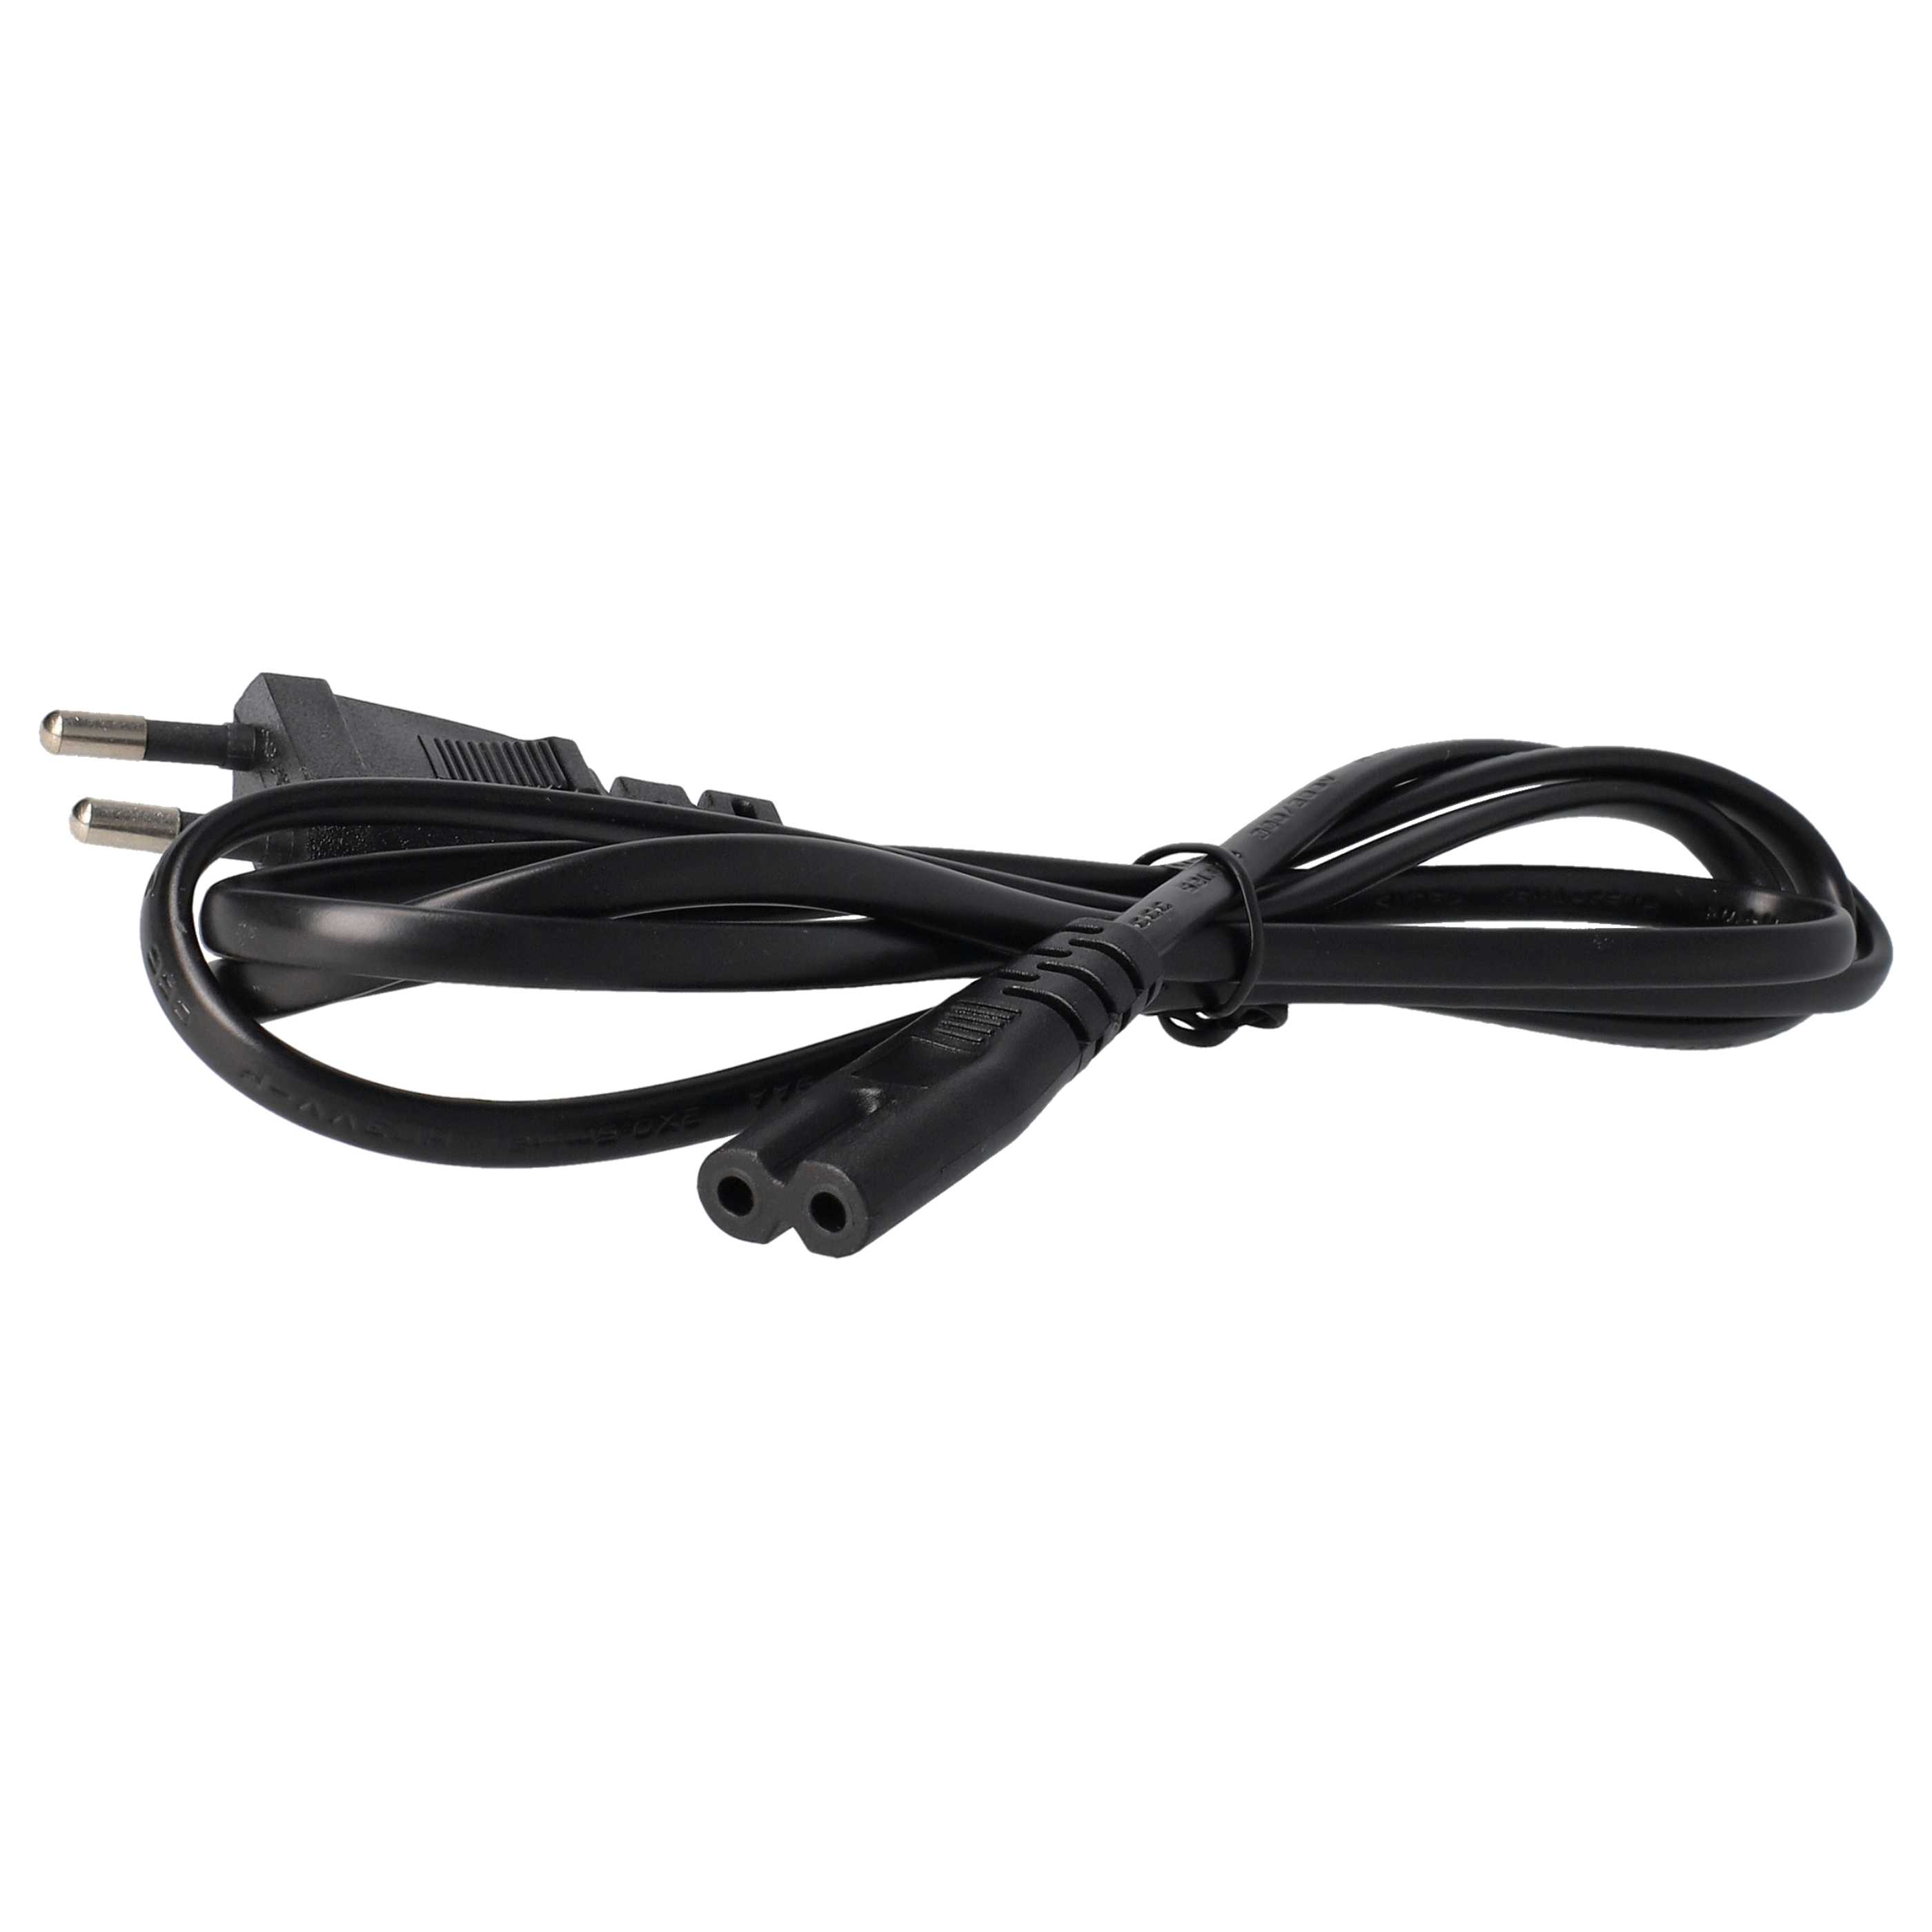 Mains Power Adapter replaces Lenovo 41N8460, 40Y7700, 92P1153, 92P1104, 40Y7696 for IBMNotebook etc., 90 W